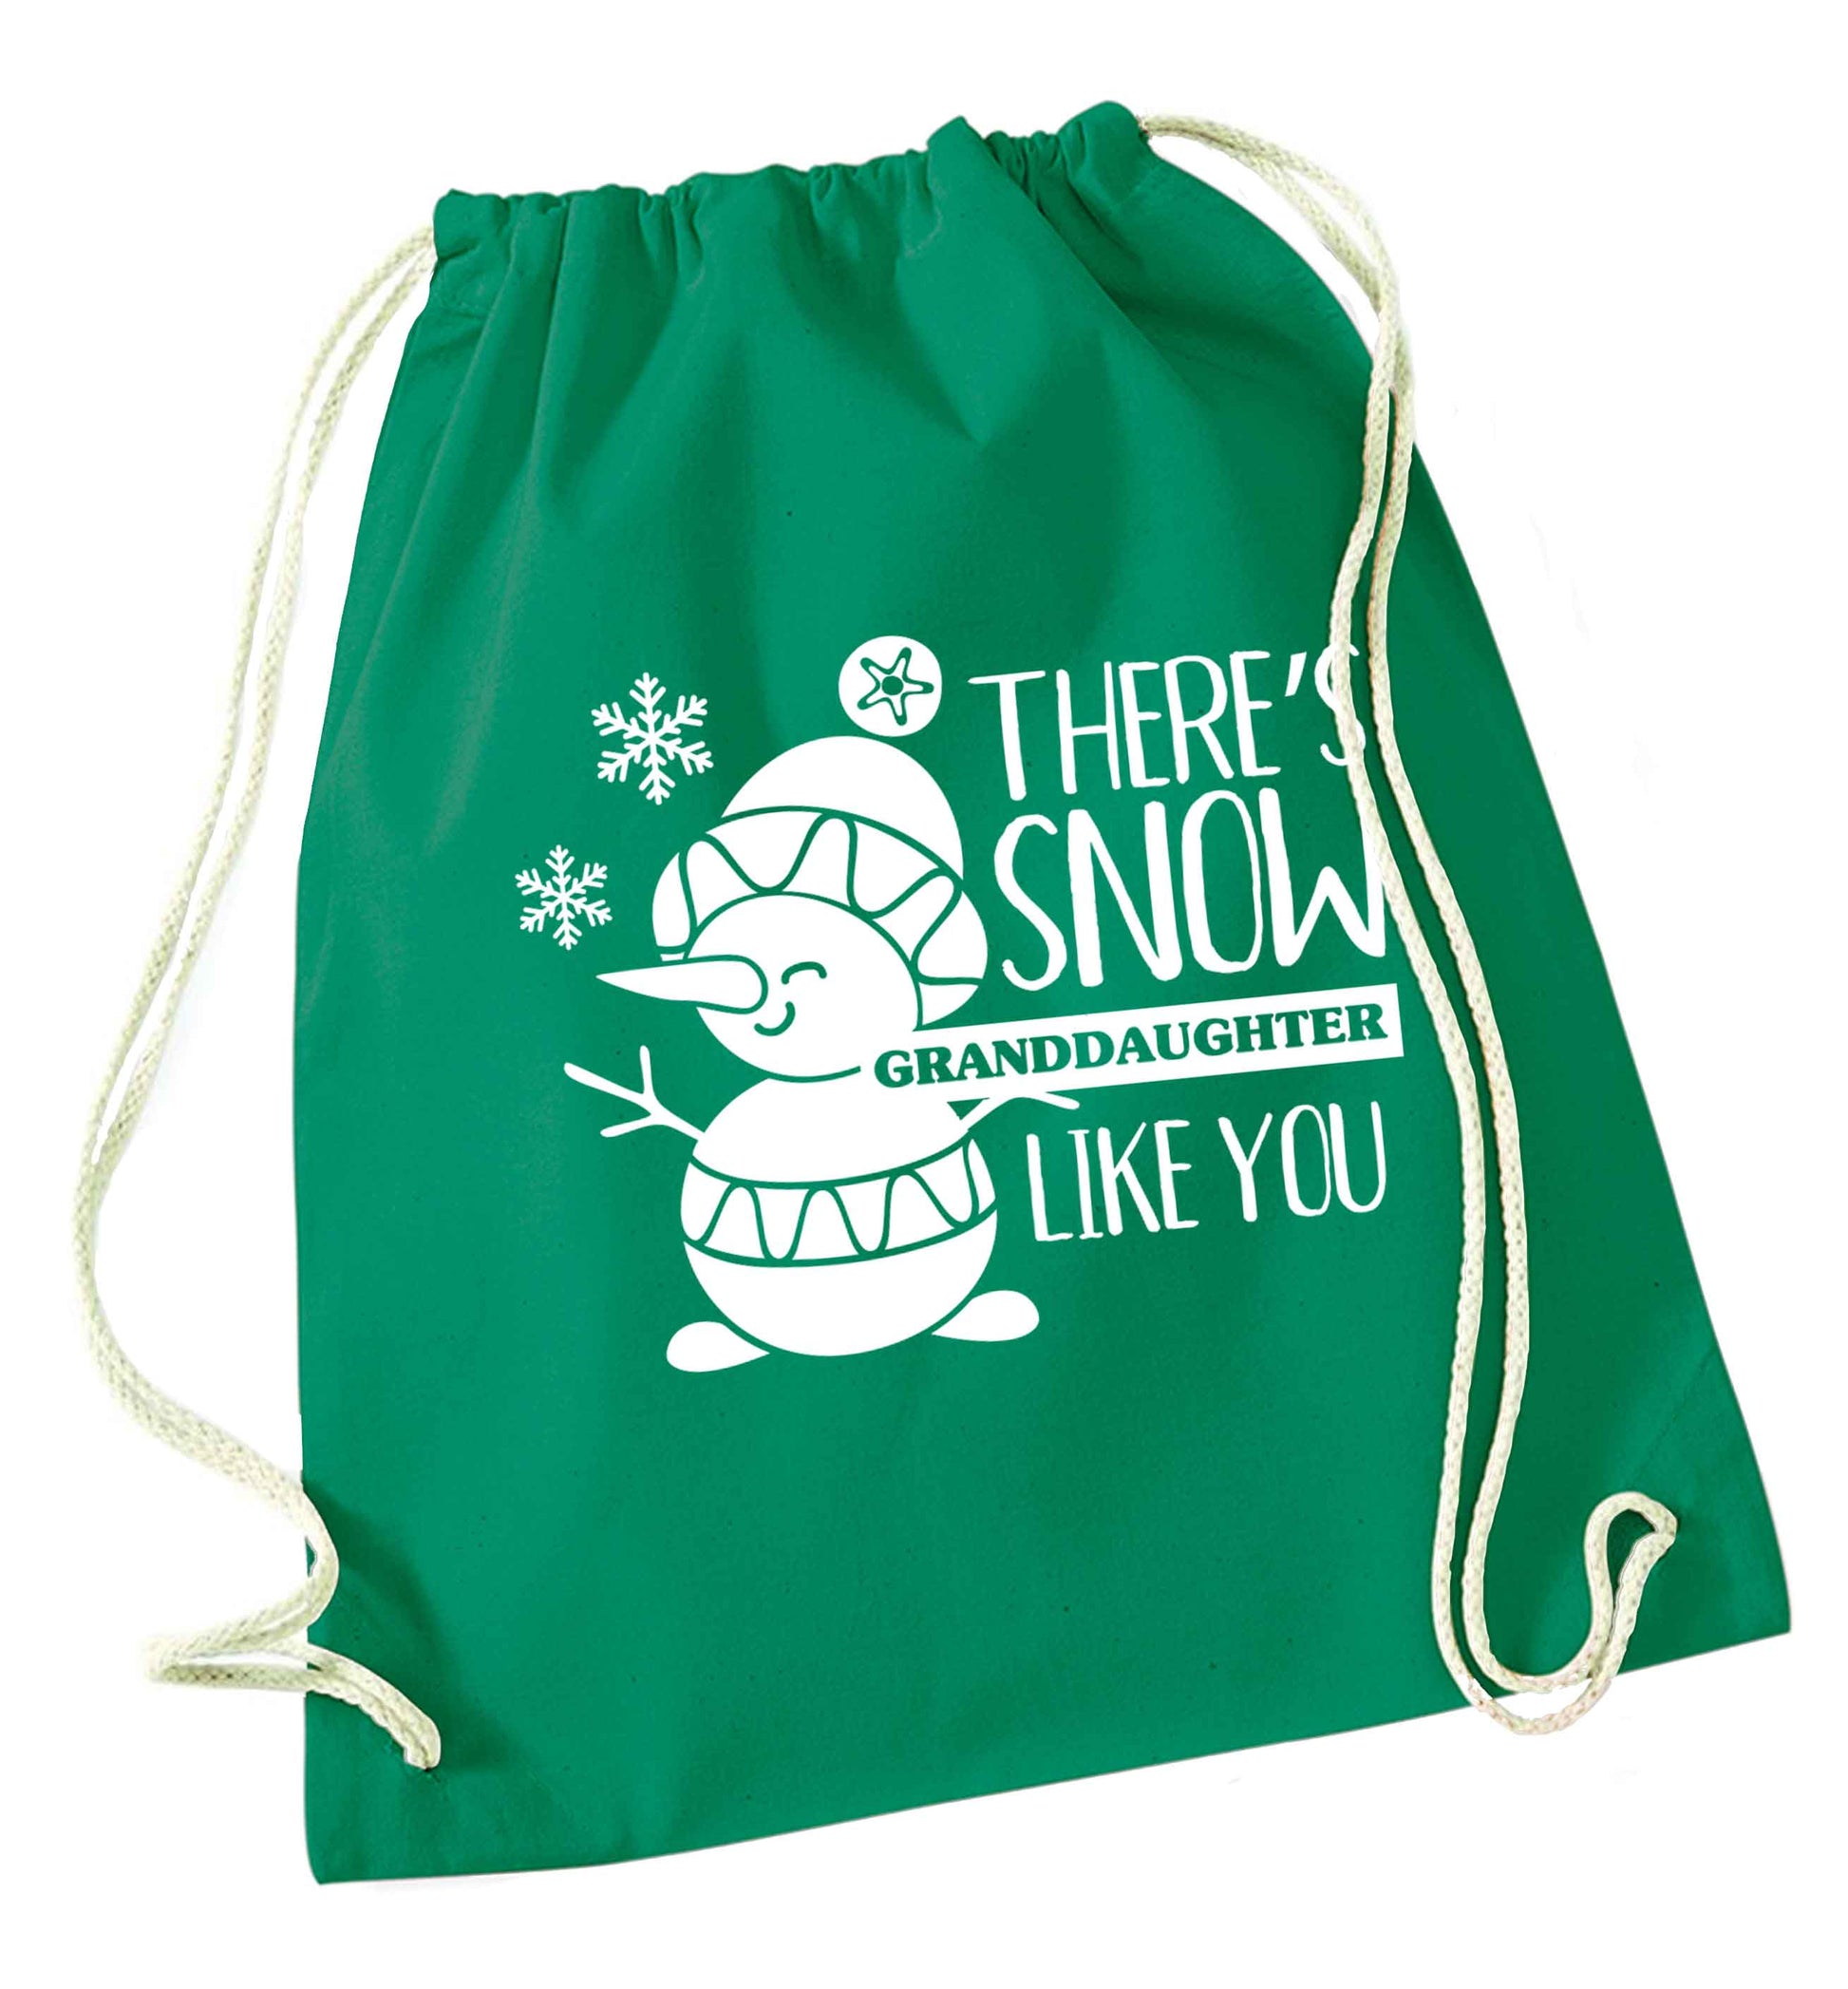 There's snow granddaughter like you green drawstring bag